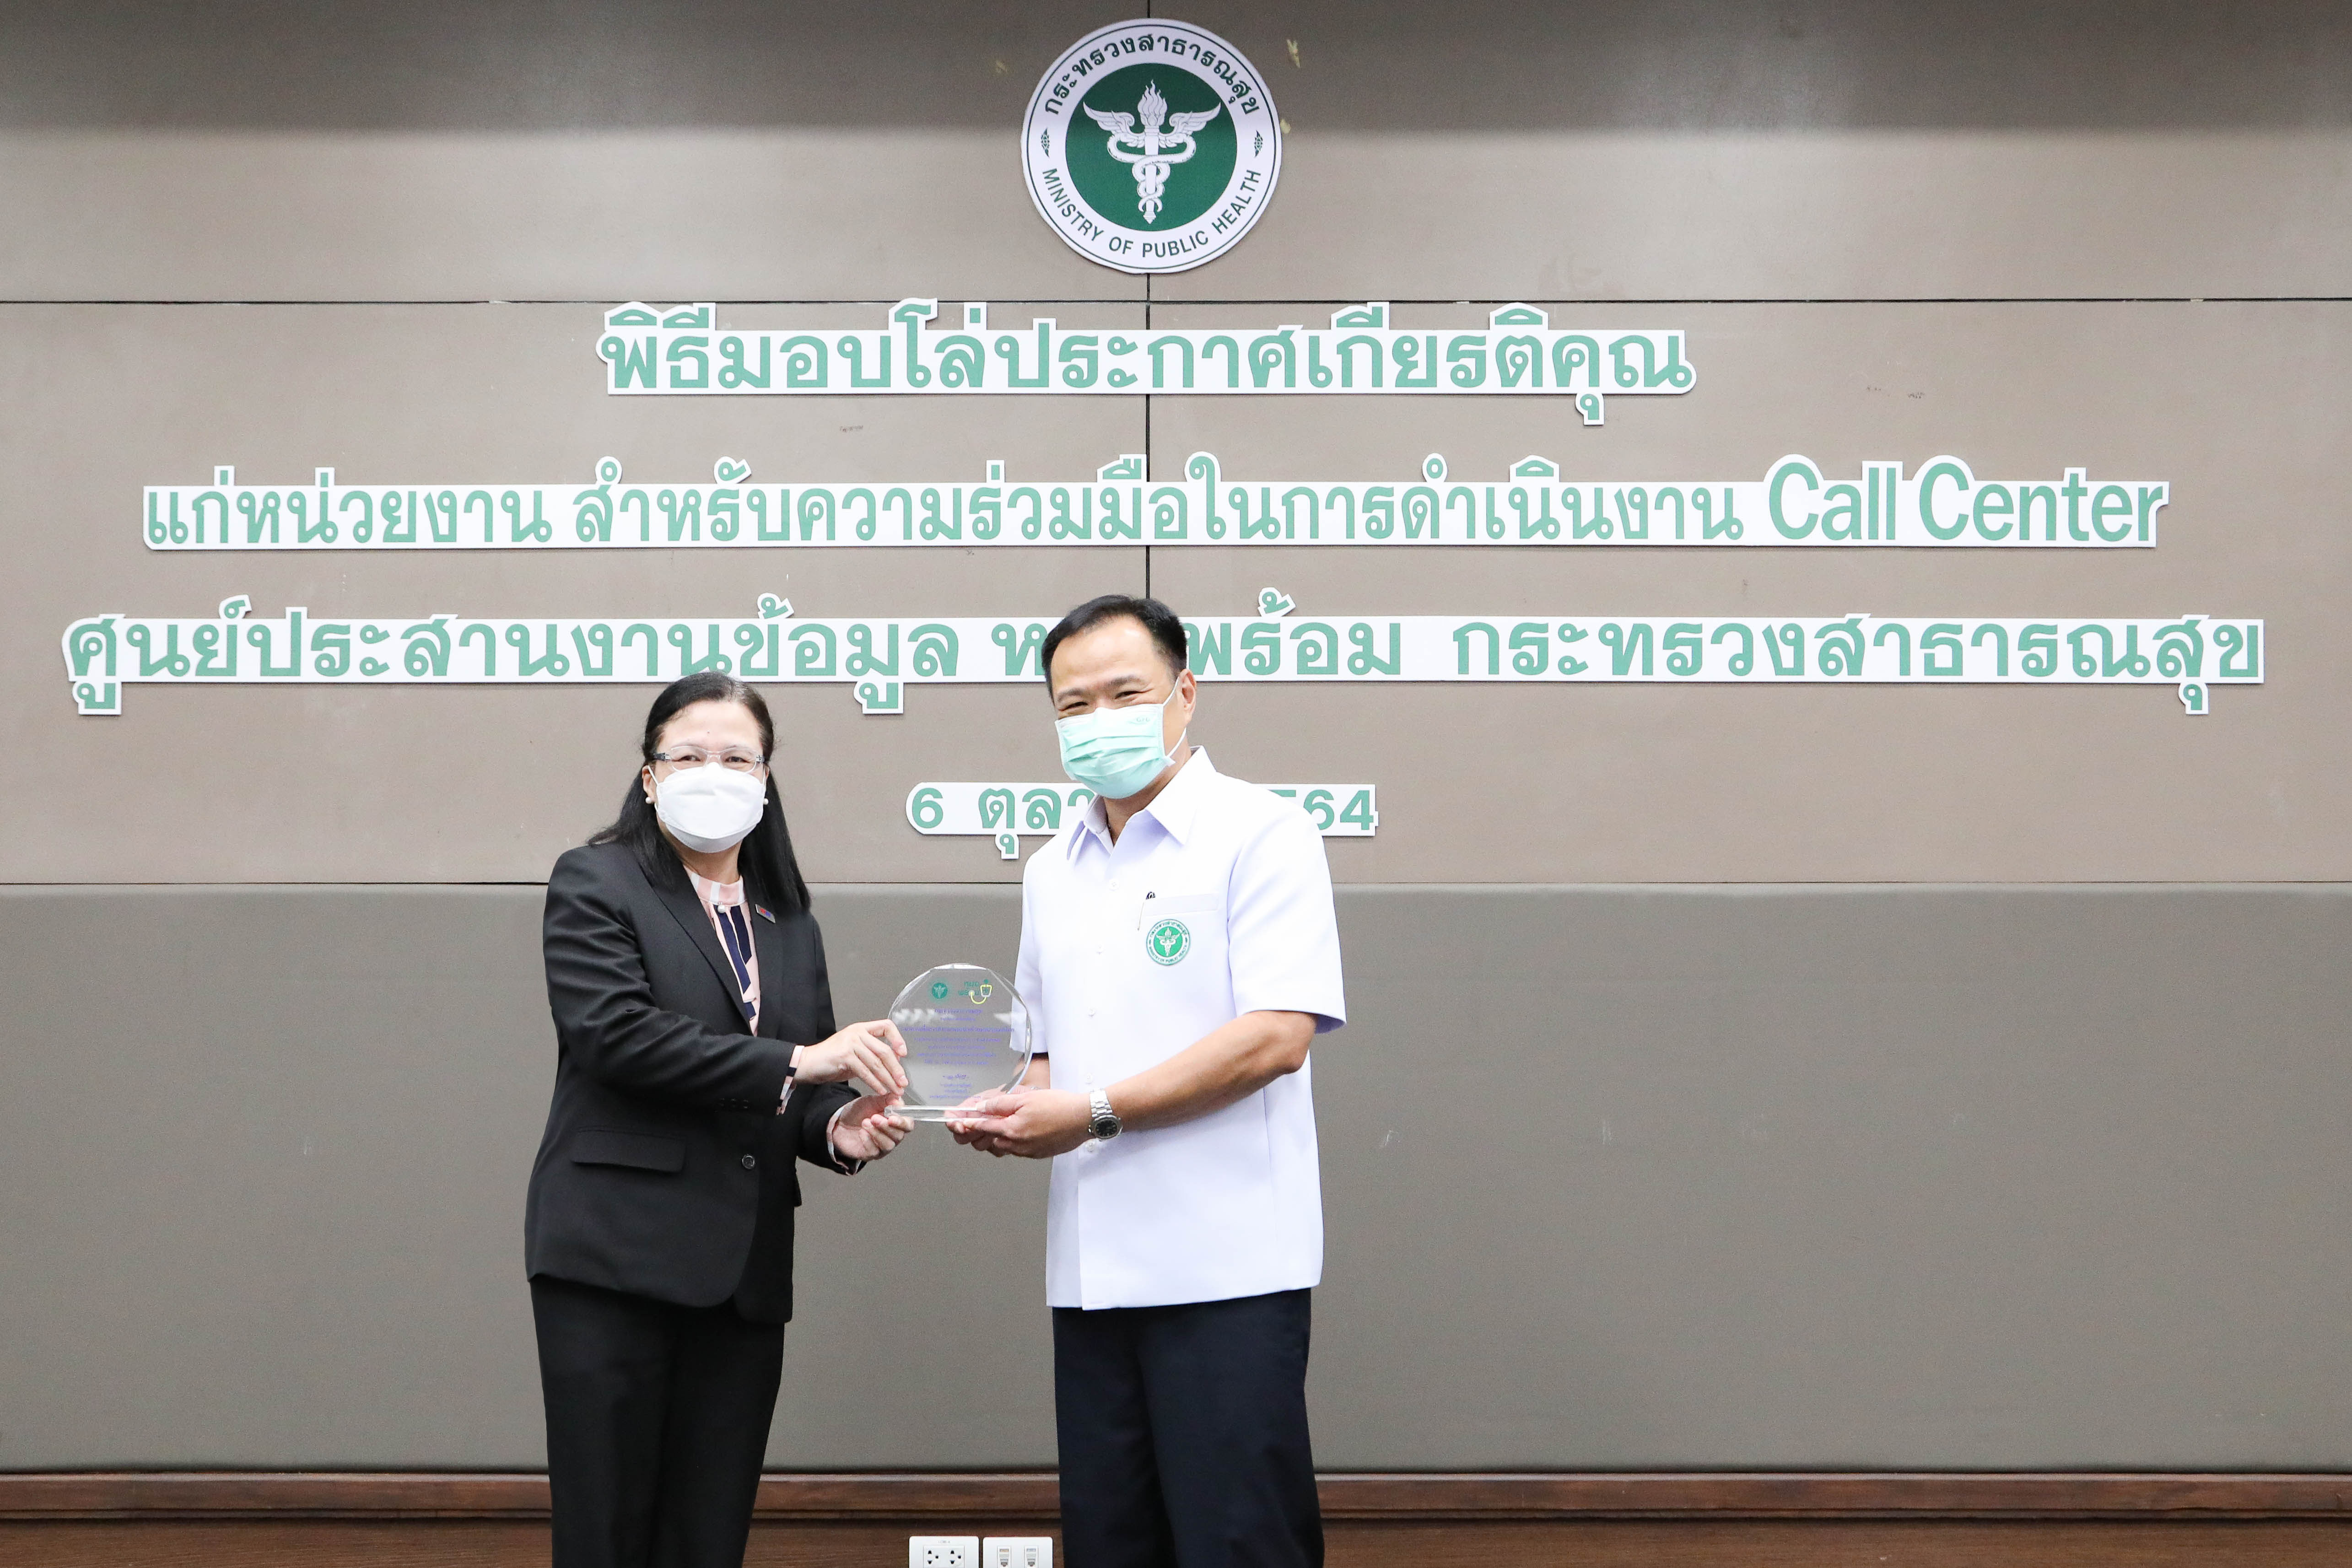 EXIM Thailand Receives Token of Appreciation for Its Collaboration with “Mor Prom” Call Center